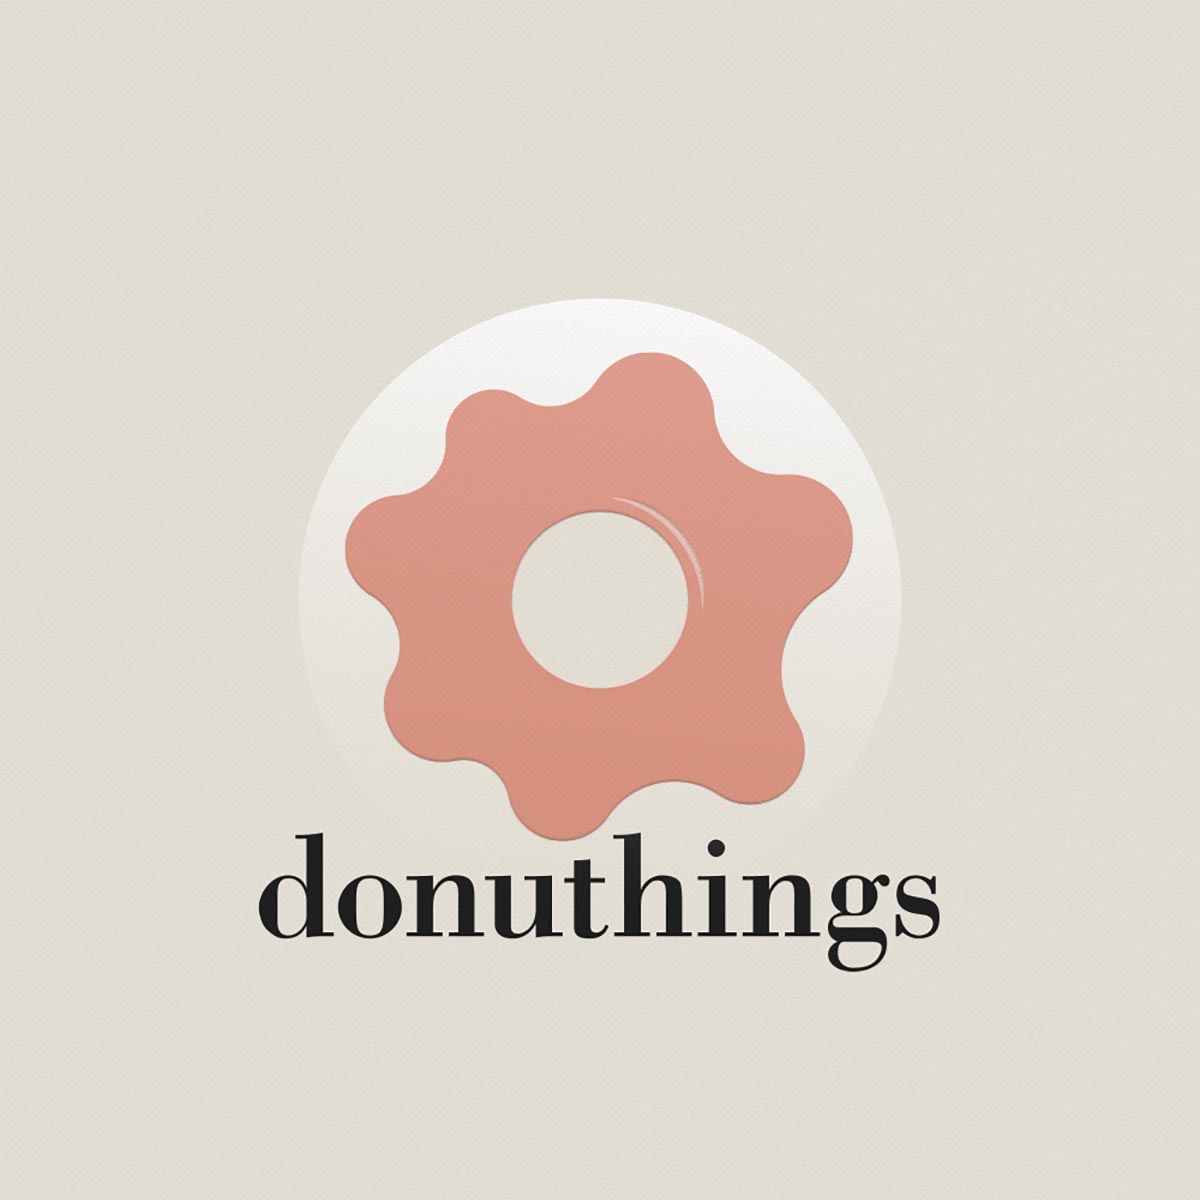 donuthings